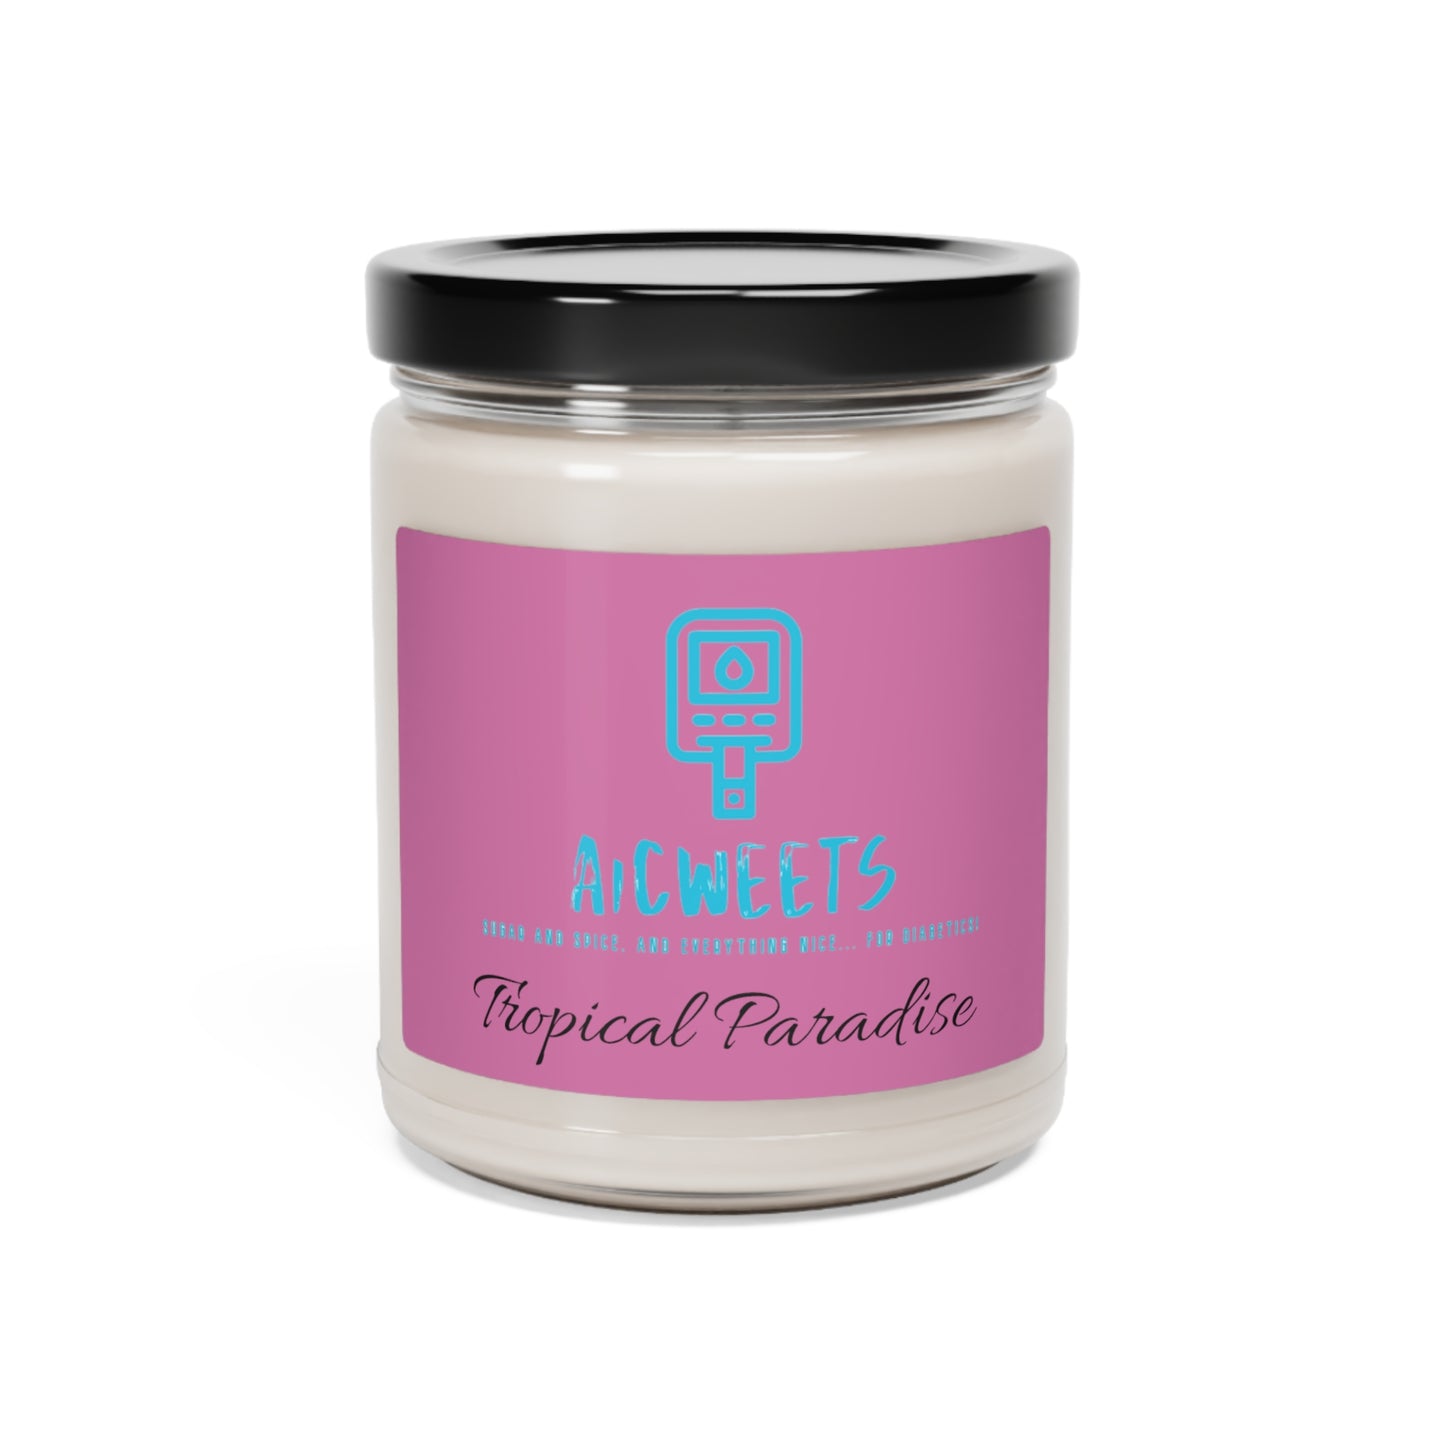 A1Cweets Scented Candle, 9oz